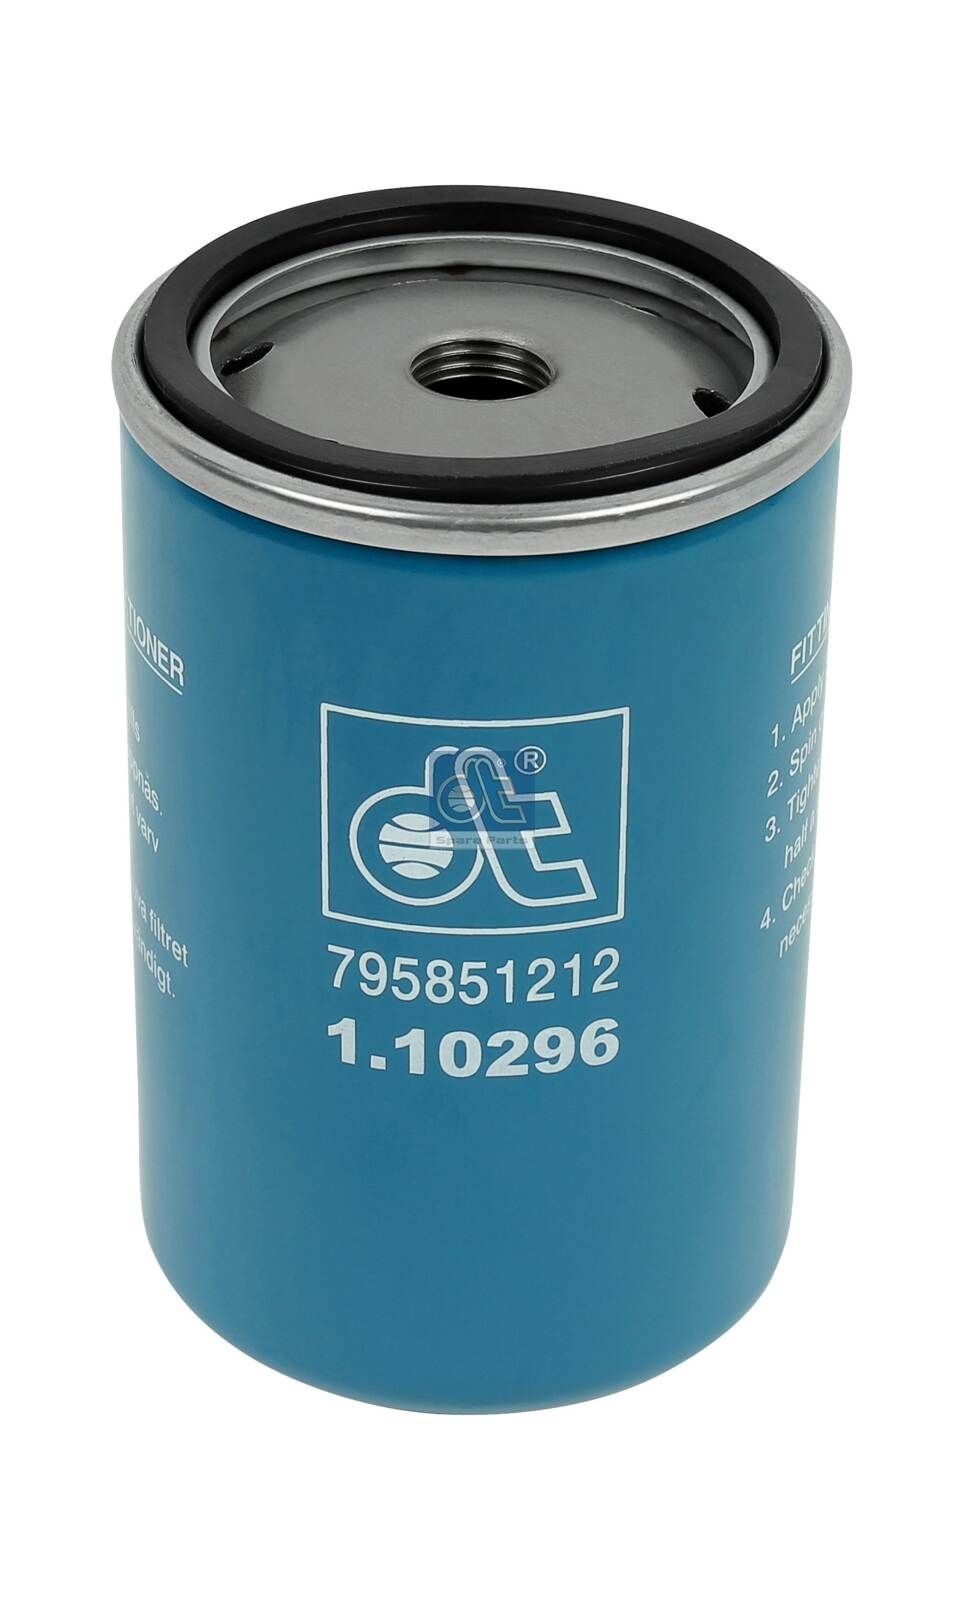 WK 723/1 DT Spare Parts 1.10296 Fuel filter 01182550